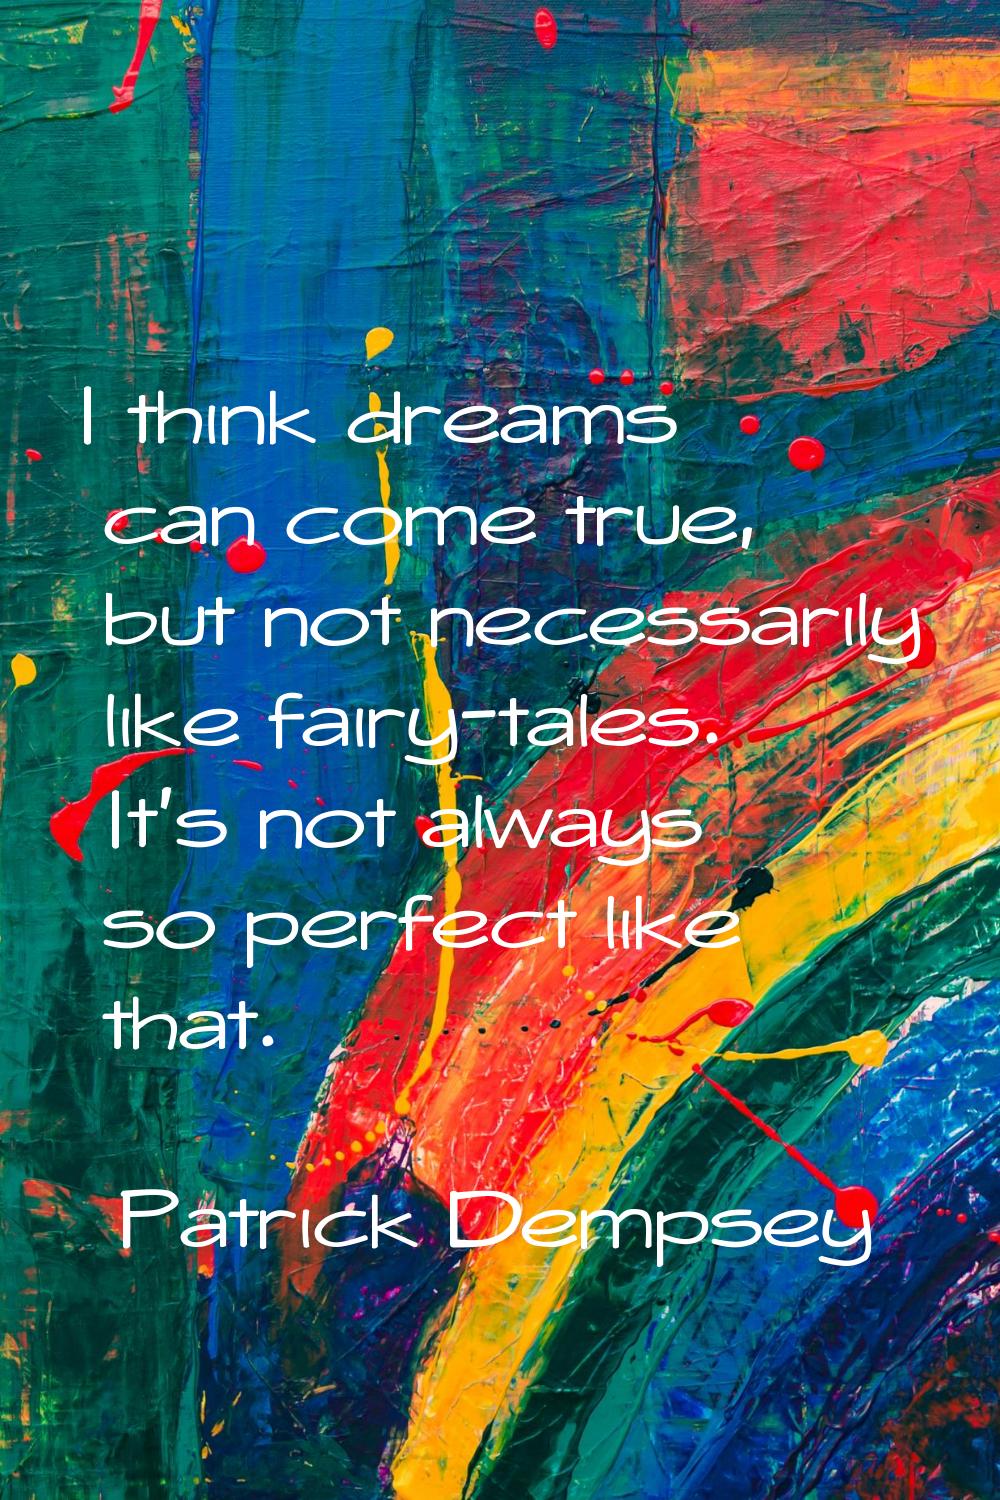 I think dreams can come true, but not necessarily like fairy-tales. It's not always so perfect like